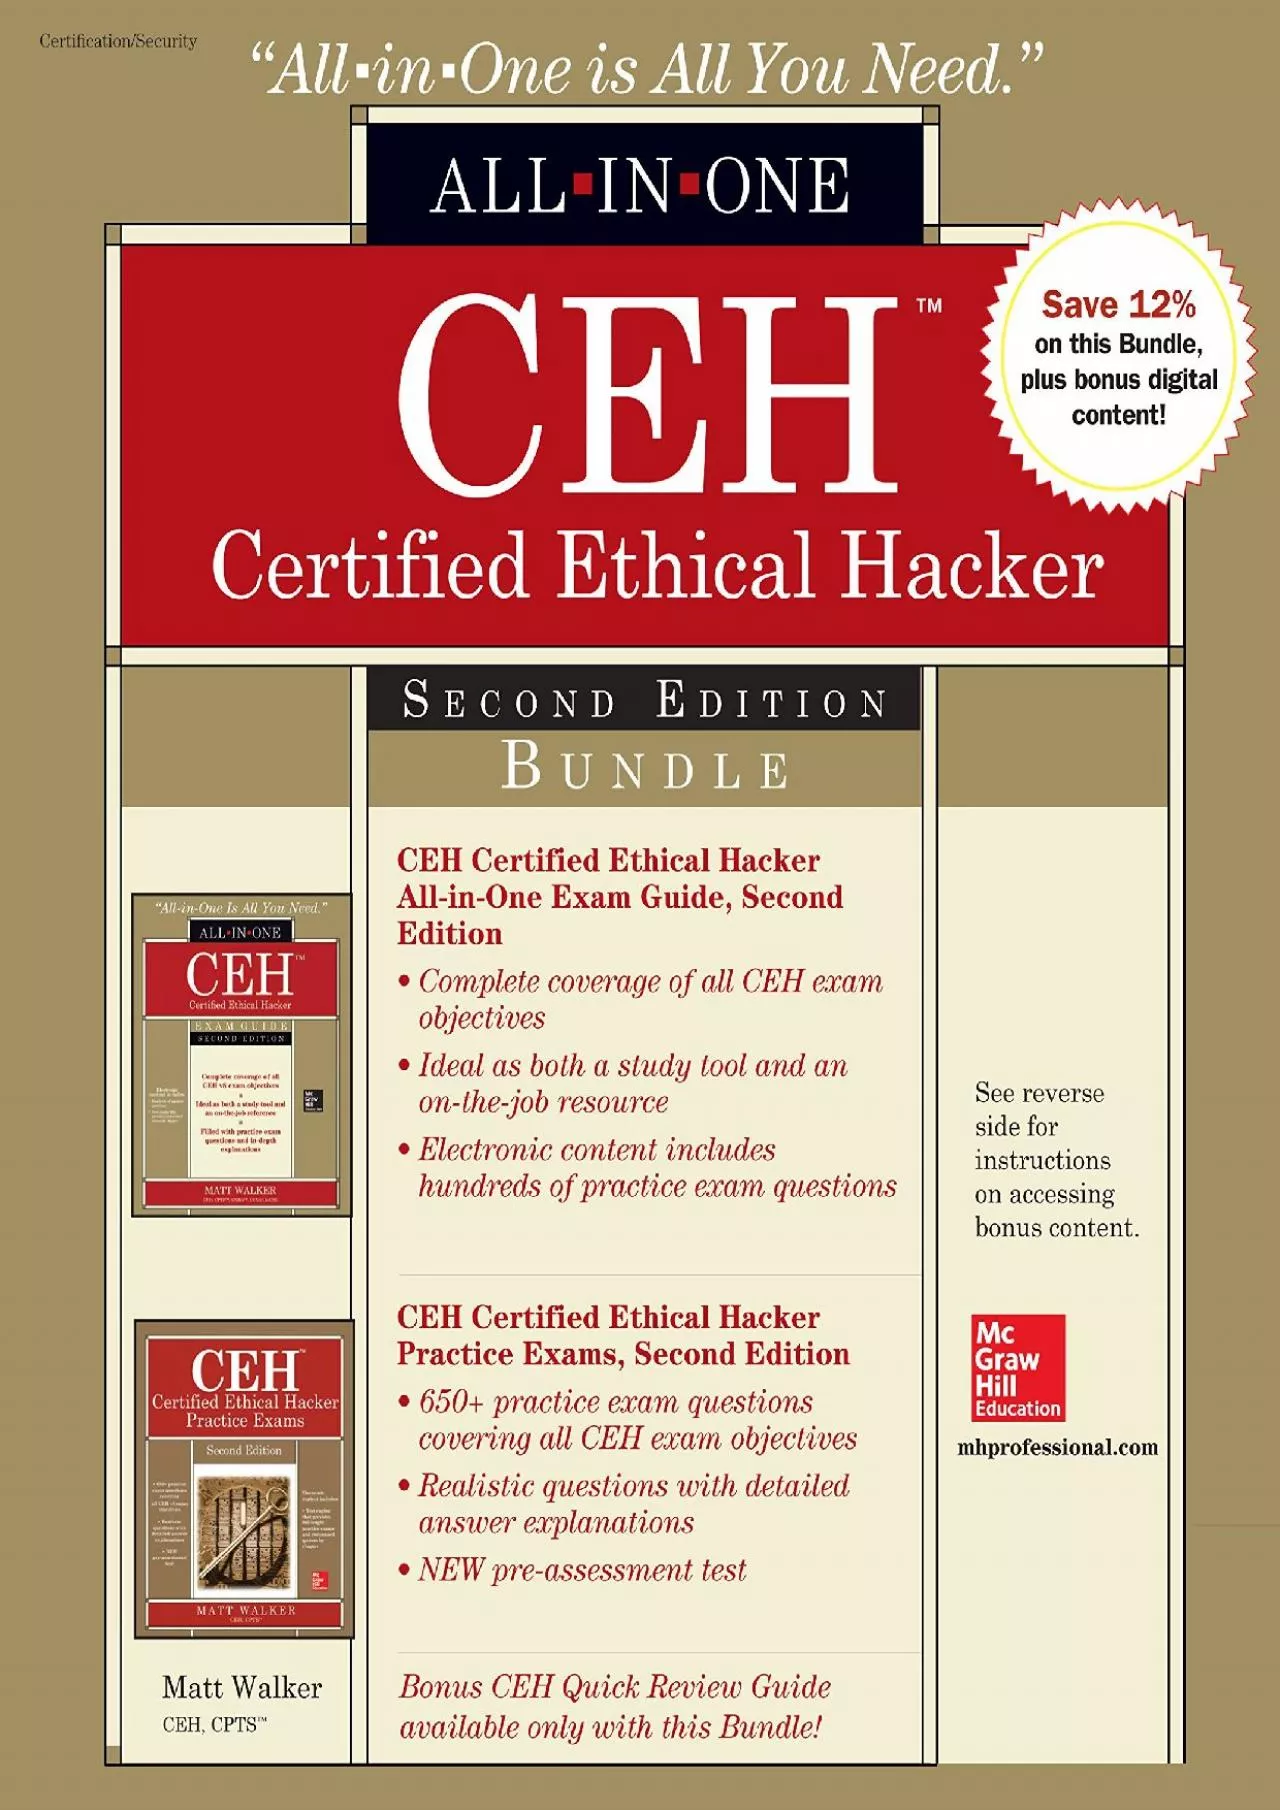 (BOOK)-CEH Certified Ethical Hacker Bundle, Second Edition (All-in-One)